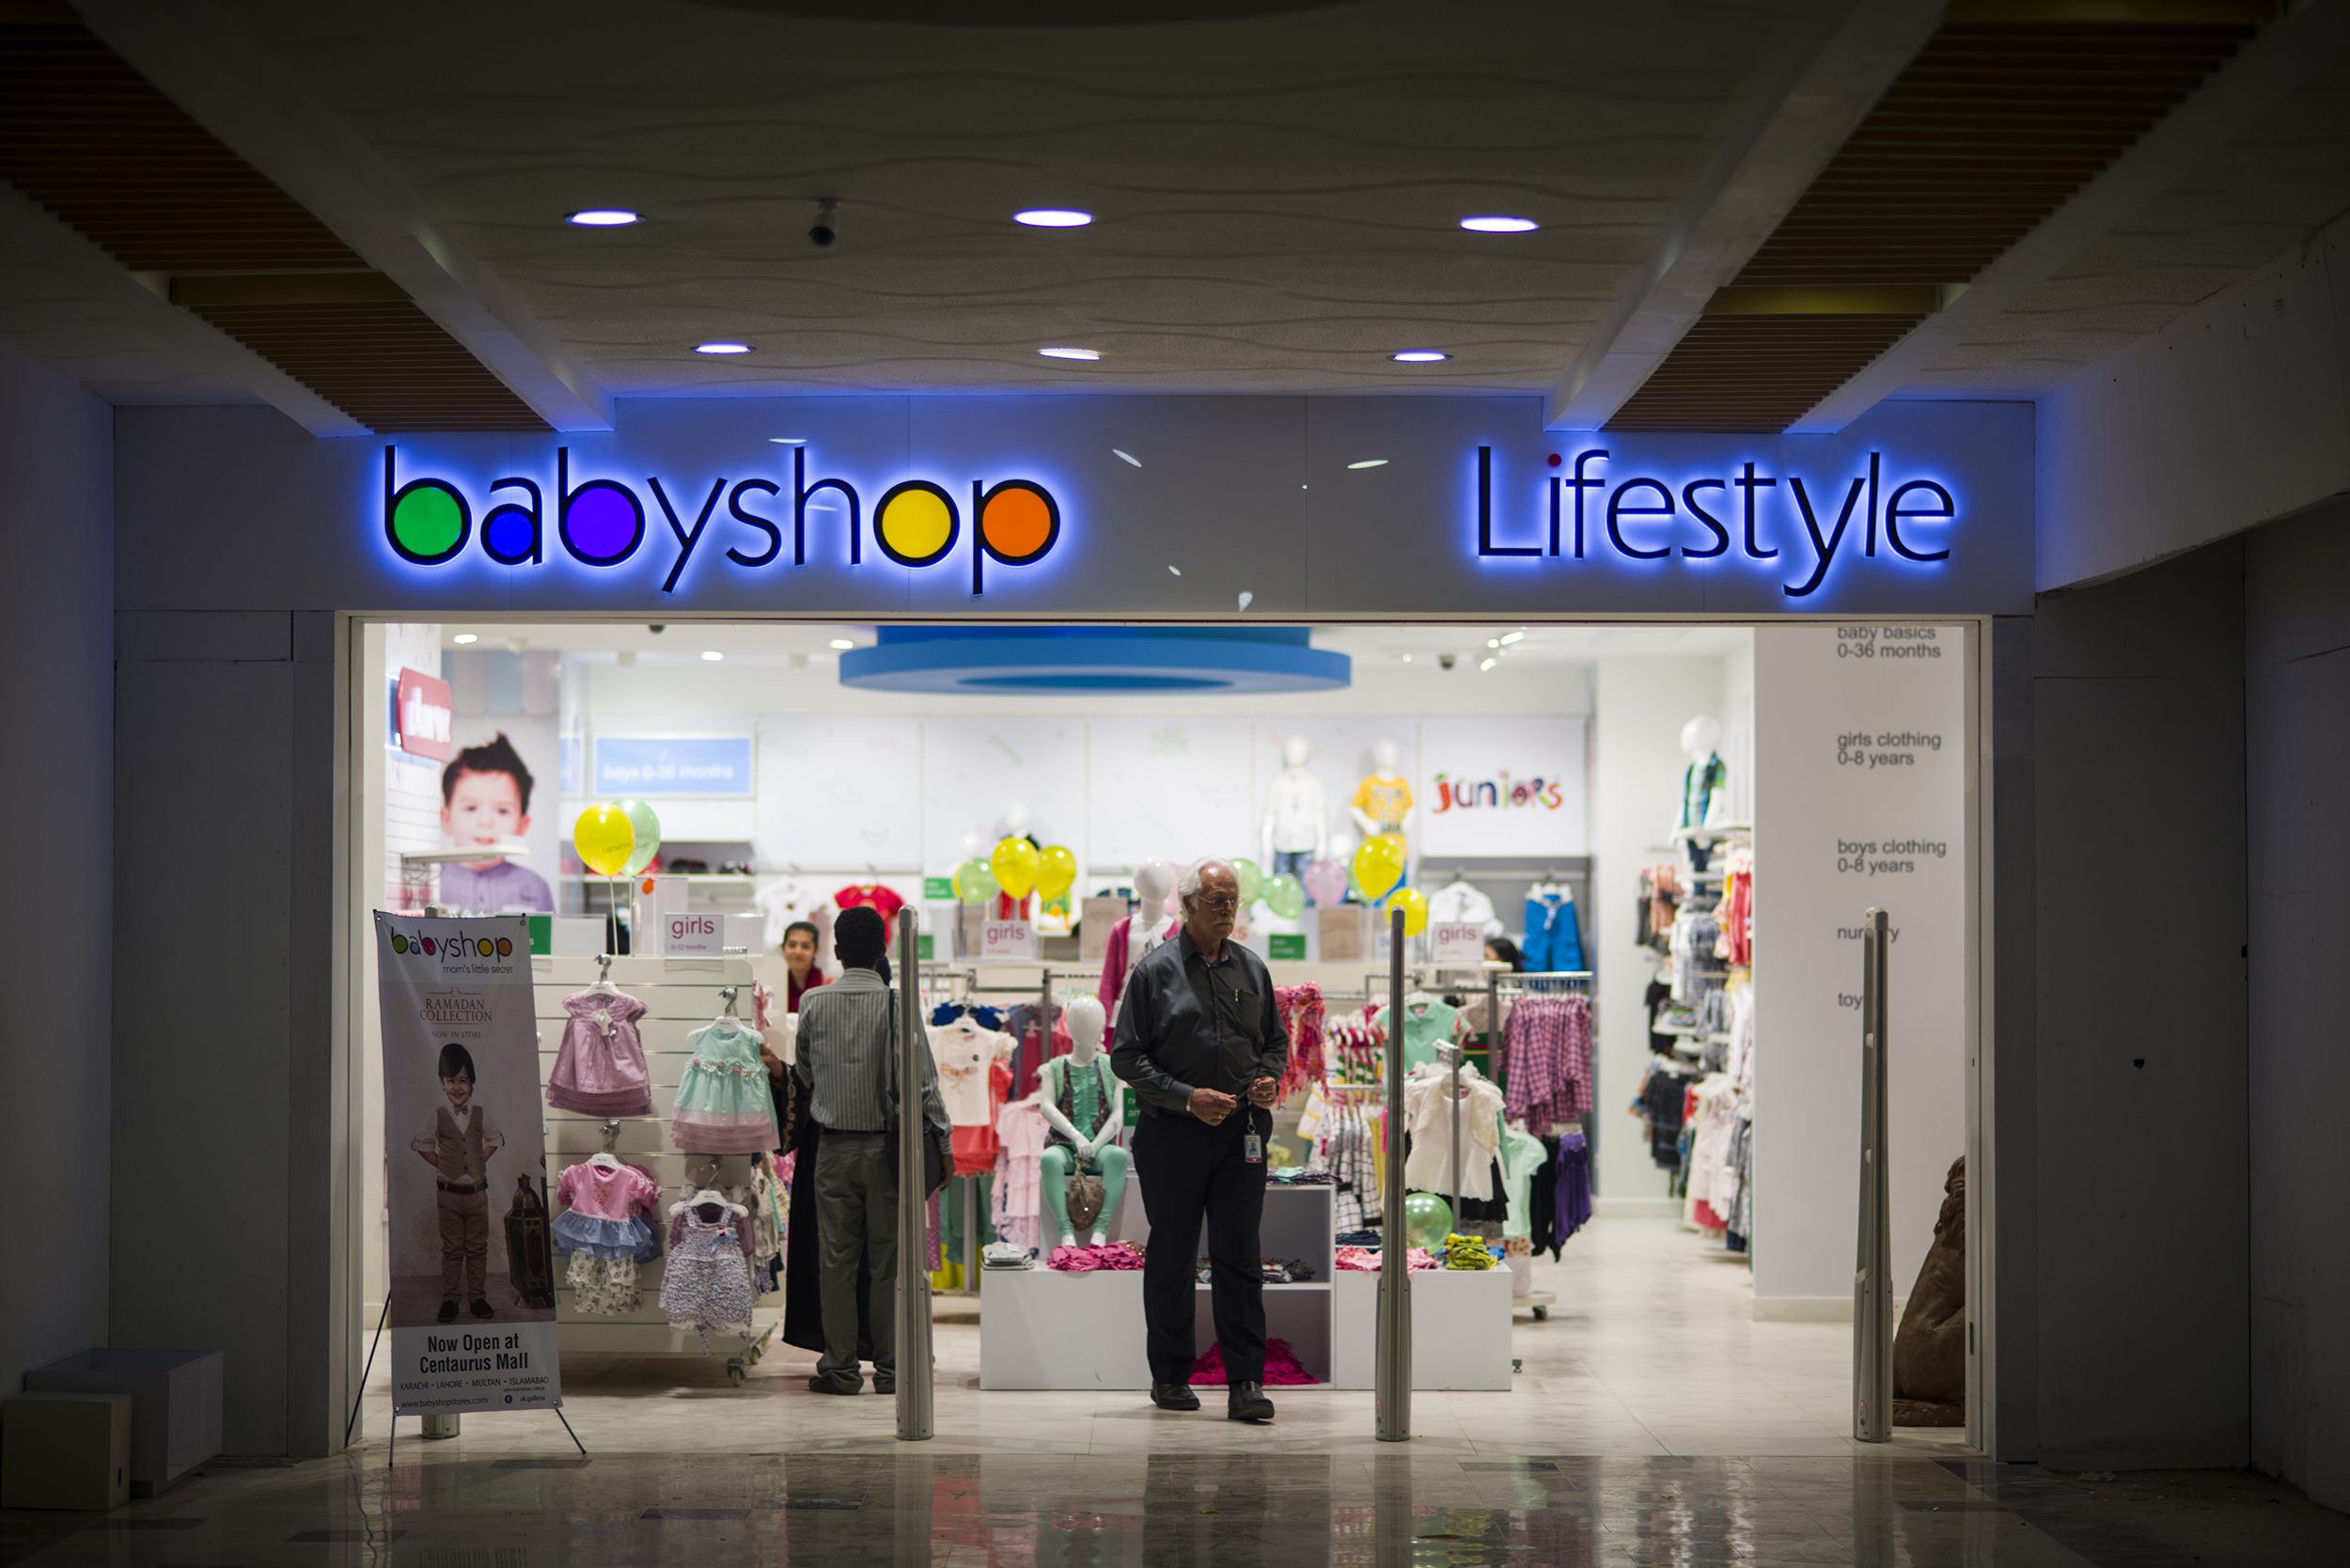 Lifestyle And Babyshop Now Open At Centaurus Mall Umairica